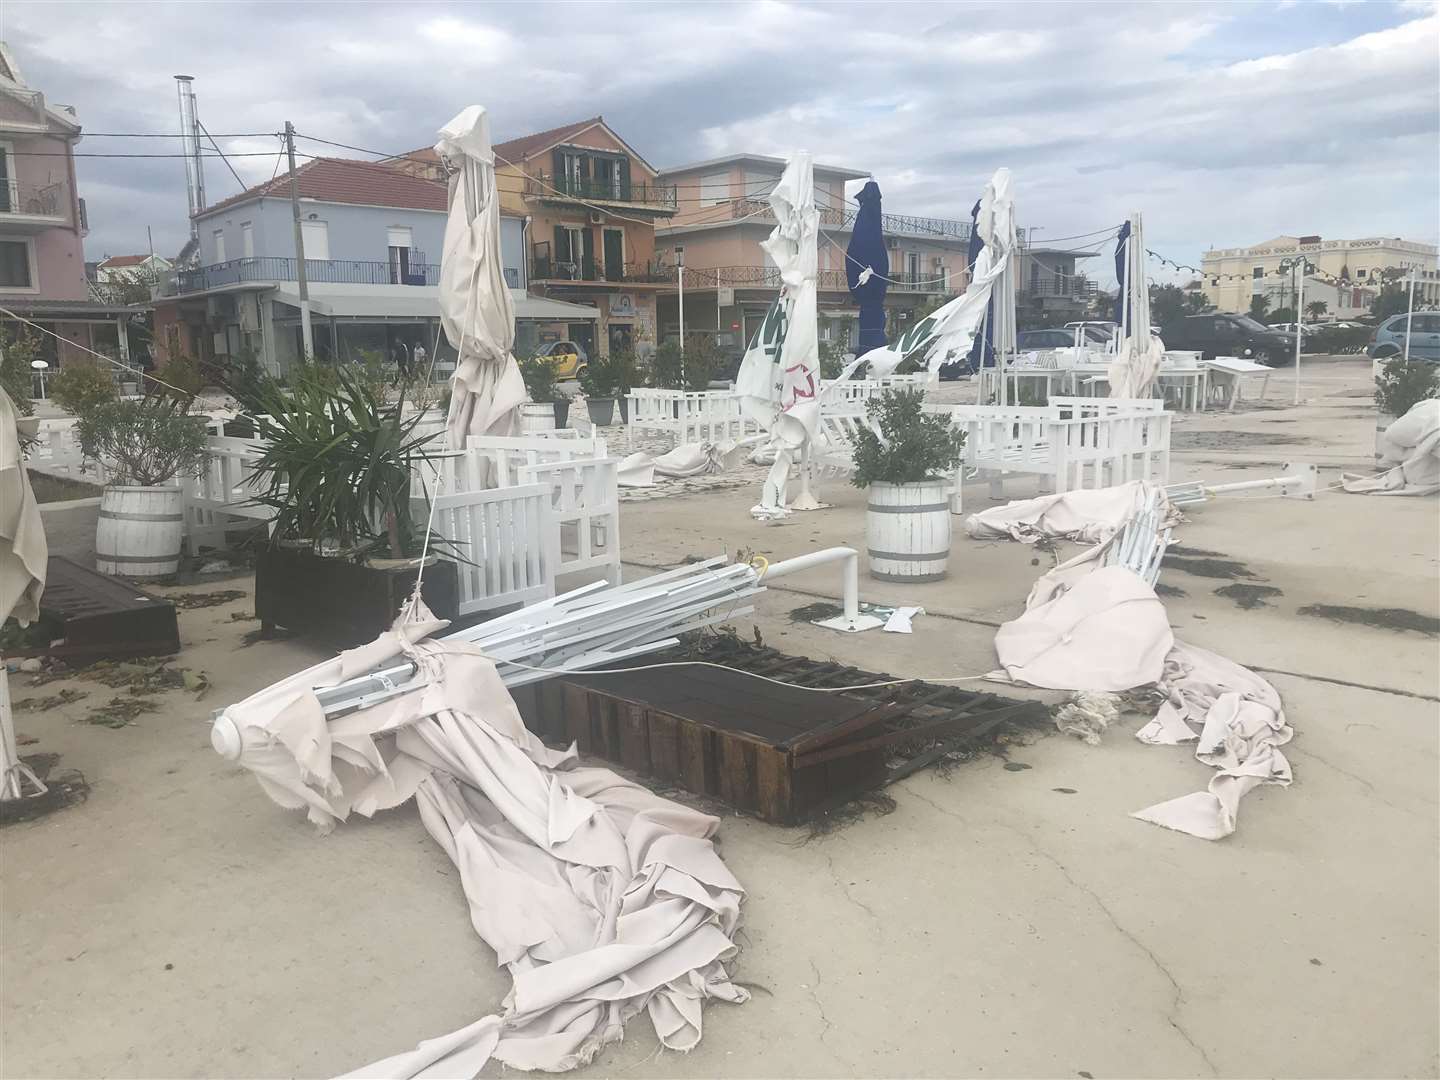 Damage from the storm in Kefalonia